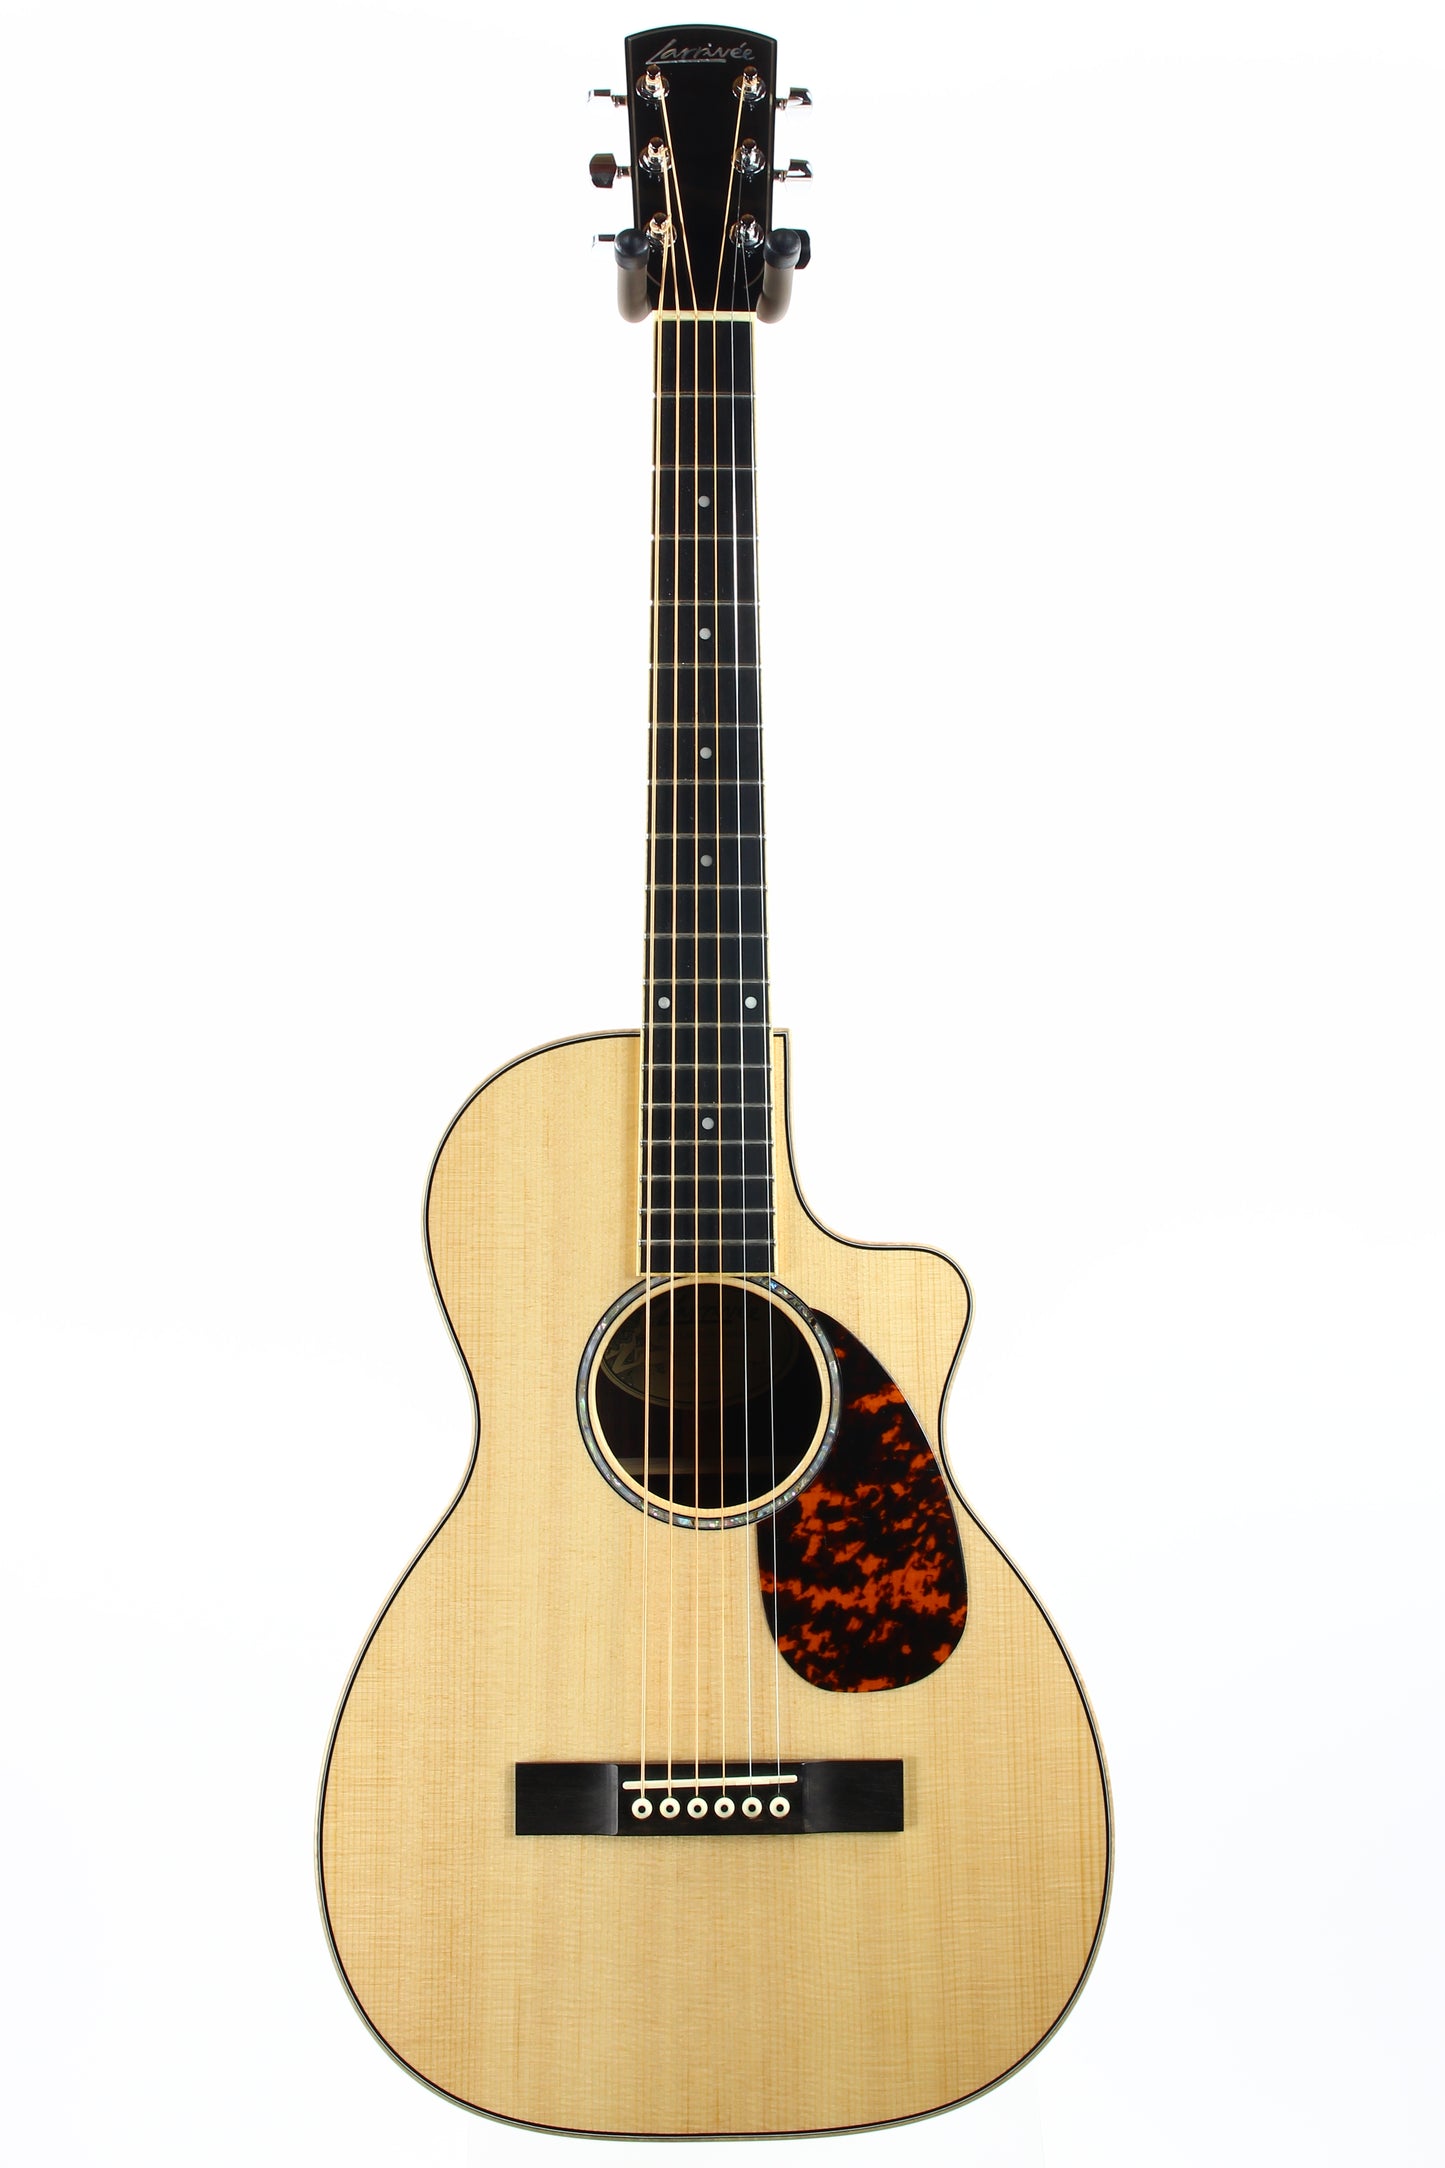 2014 Larrivee USA PV-09 Parlor Small Body Venetian Cutaway Acoustic Guitar -- Sitka Spruce, East Indian Rosewood!